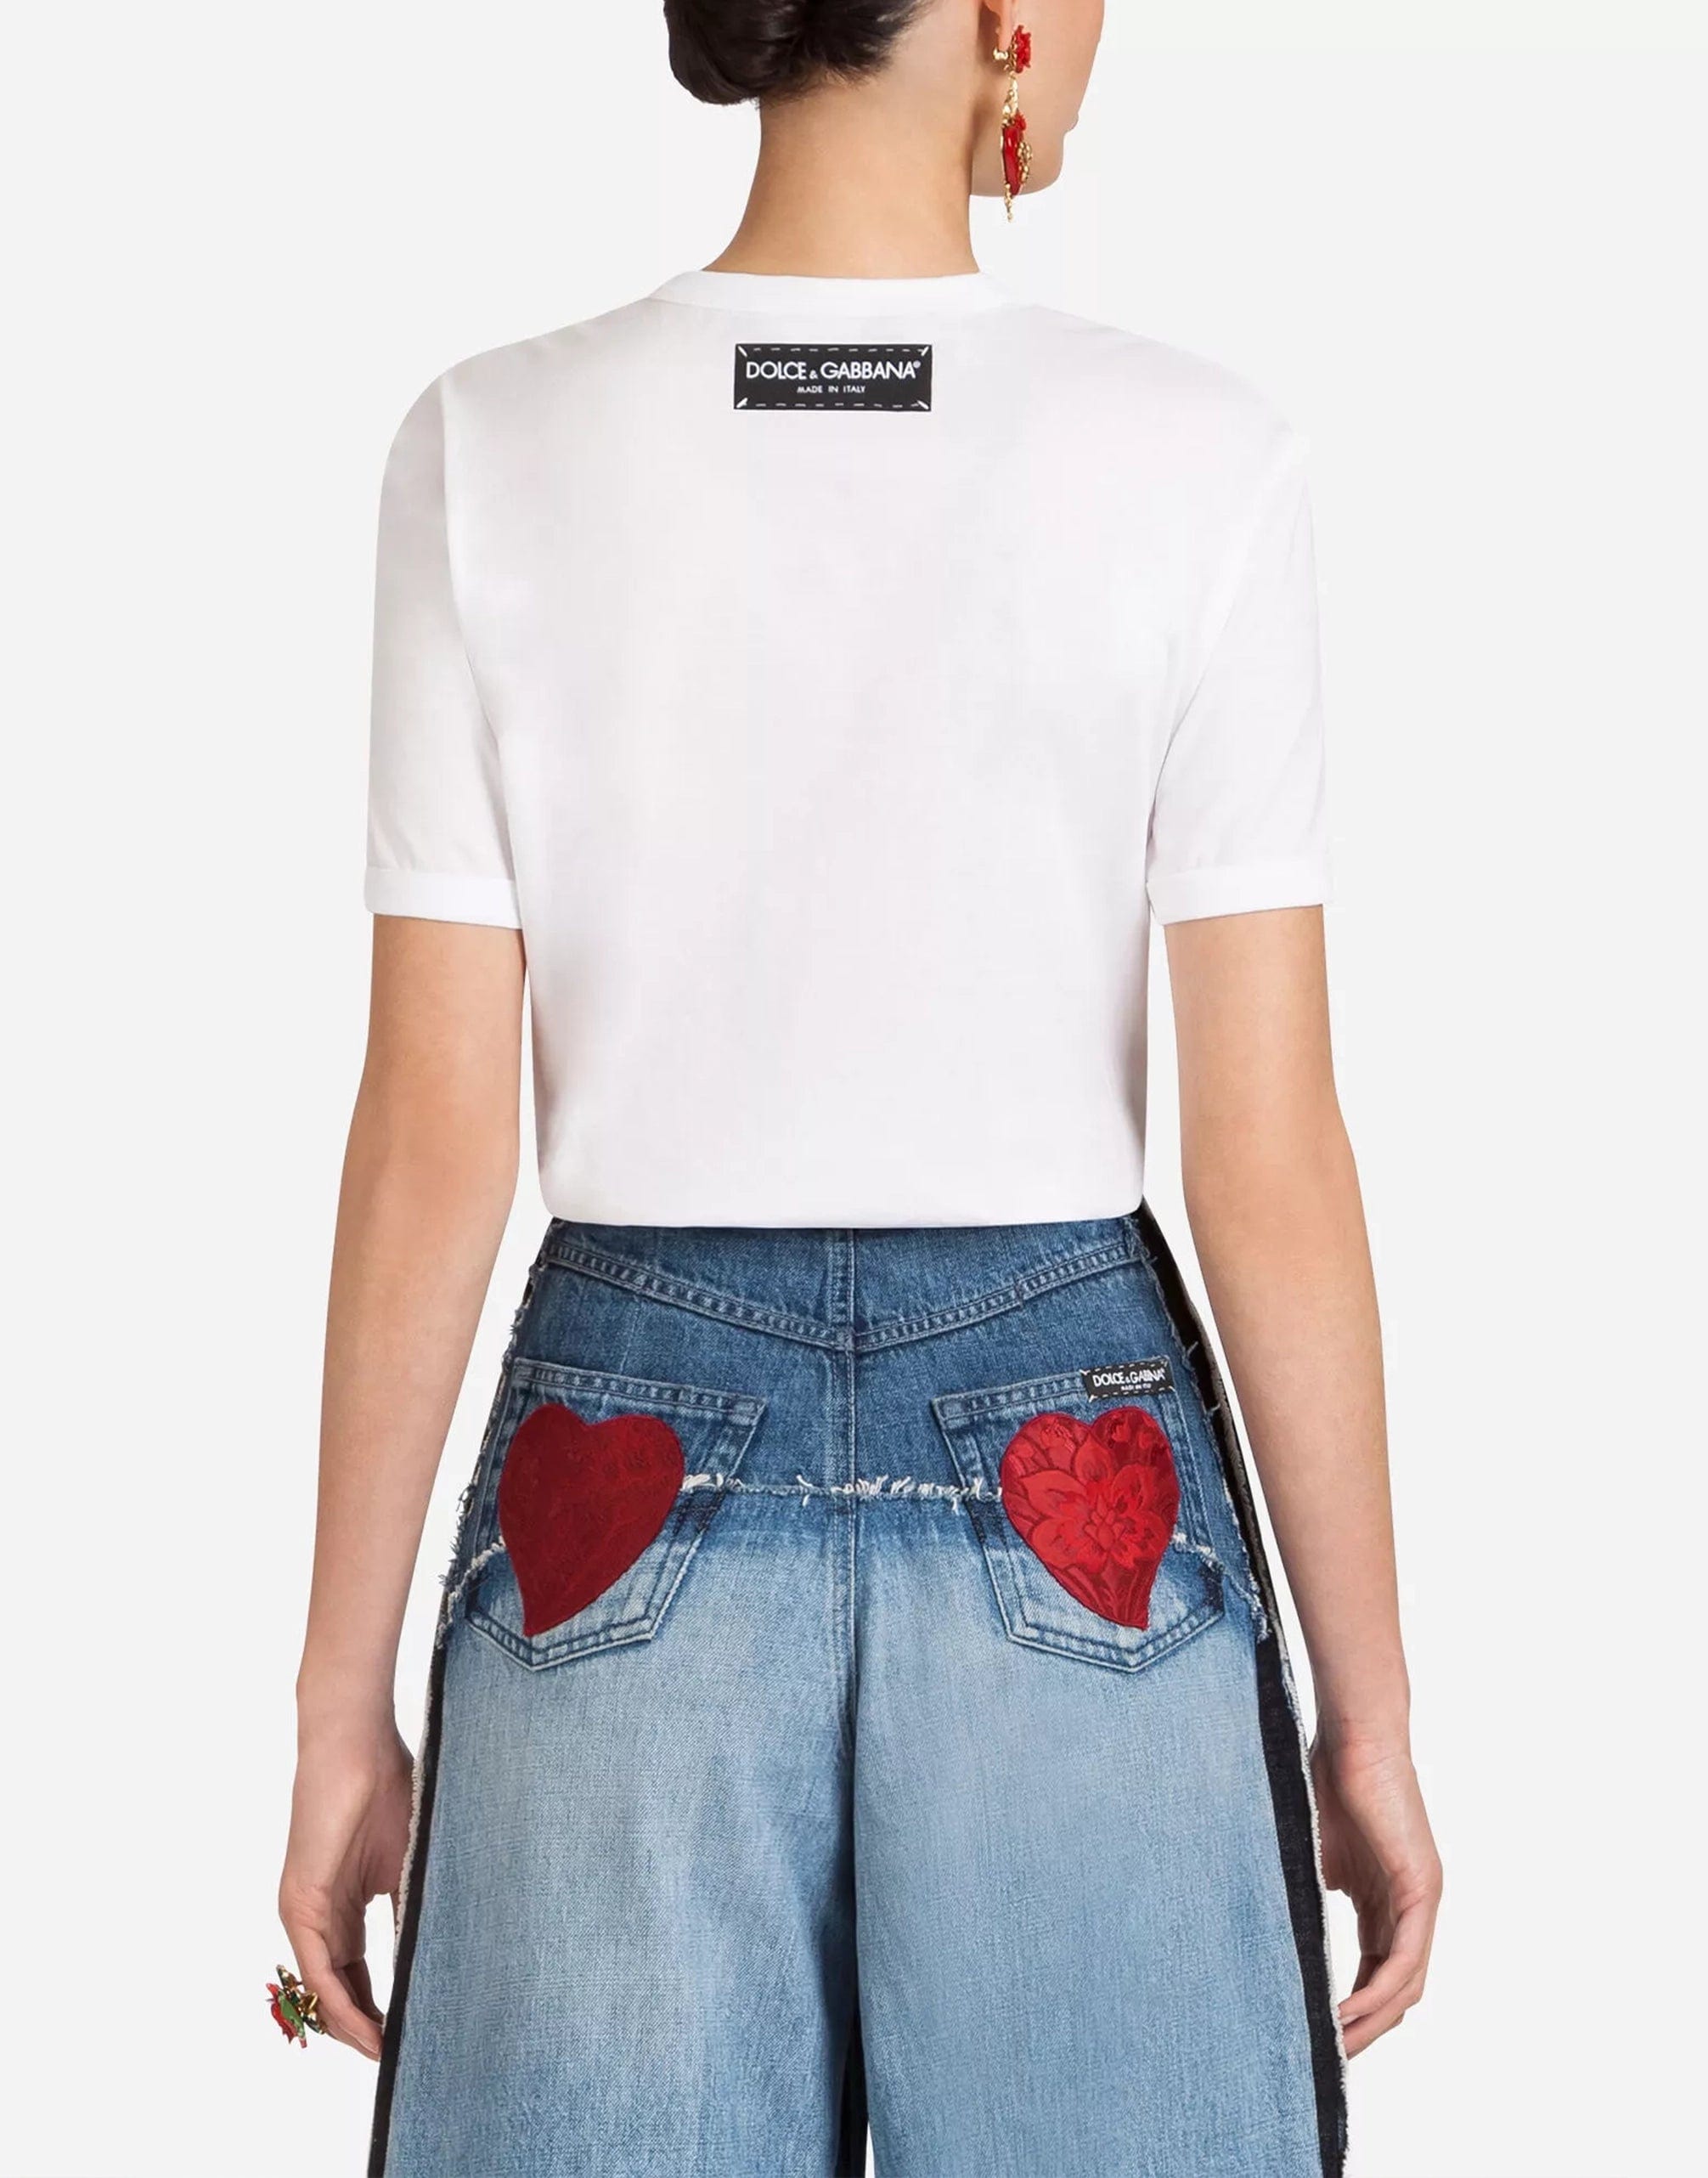 Dolce & Gabbana Cotton T-Shirt With Patches